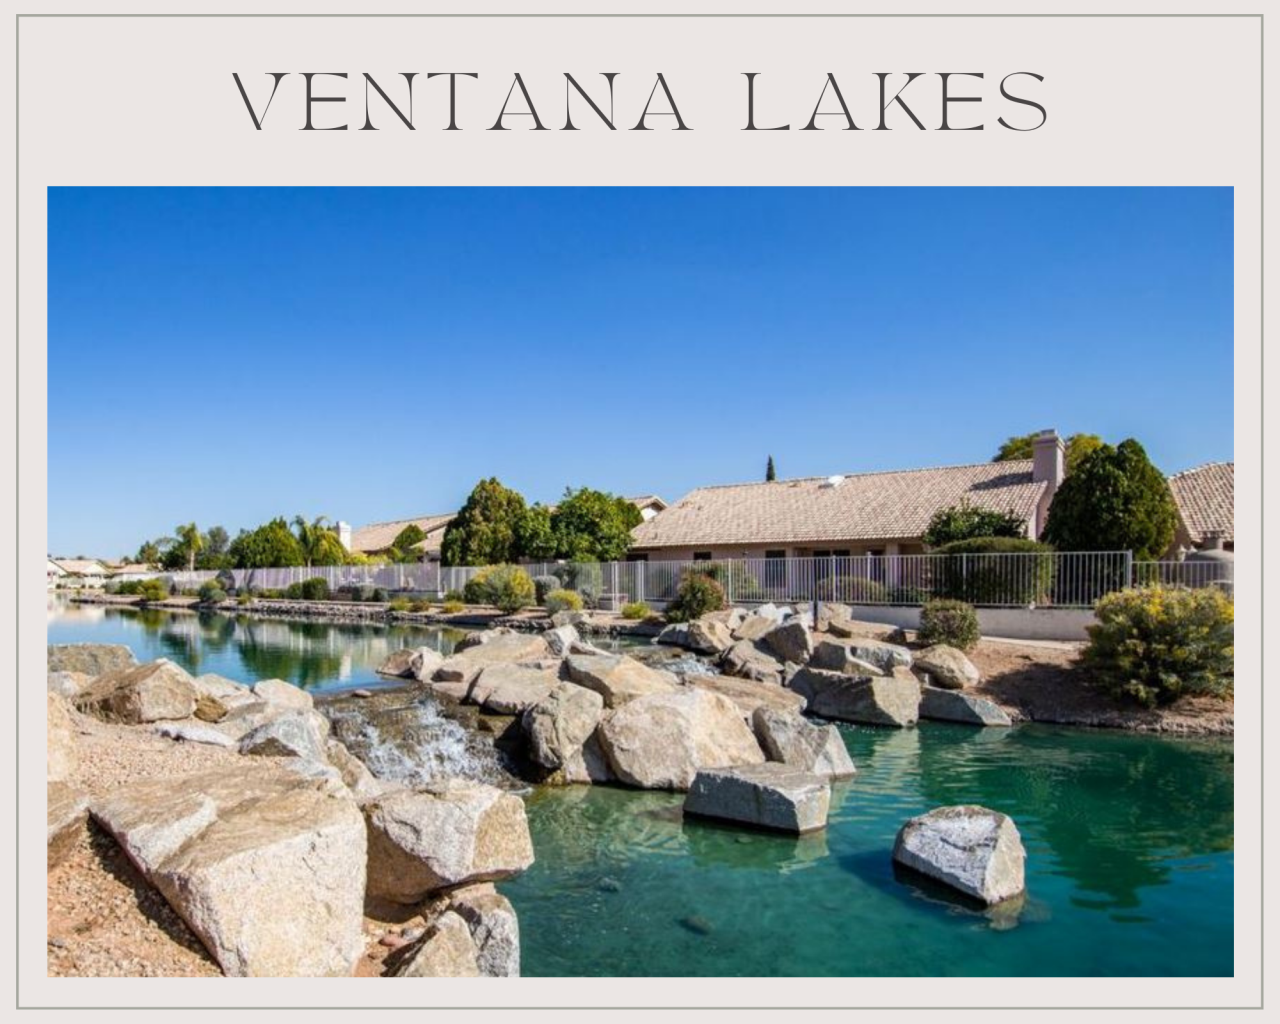 Ventana Lakes Peoria AZ resales real estate and homes for sale MLS listings